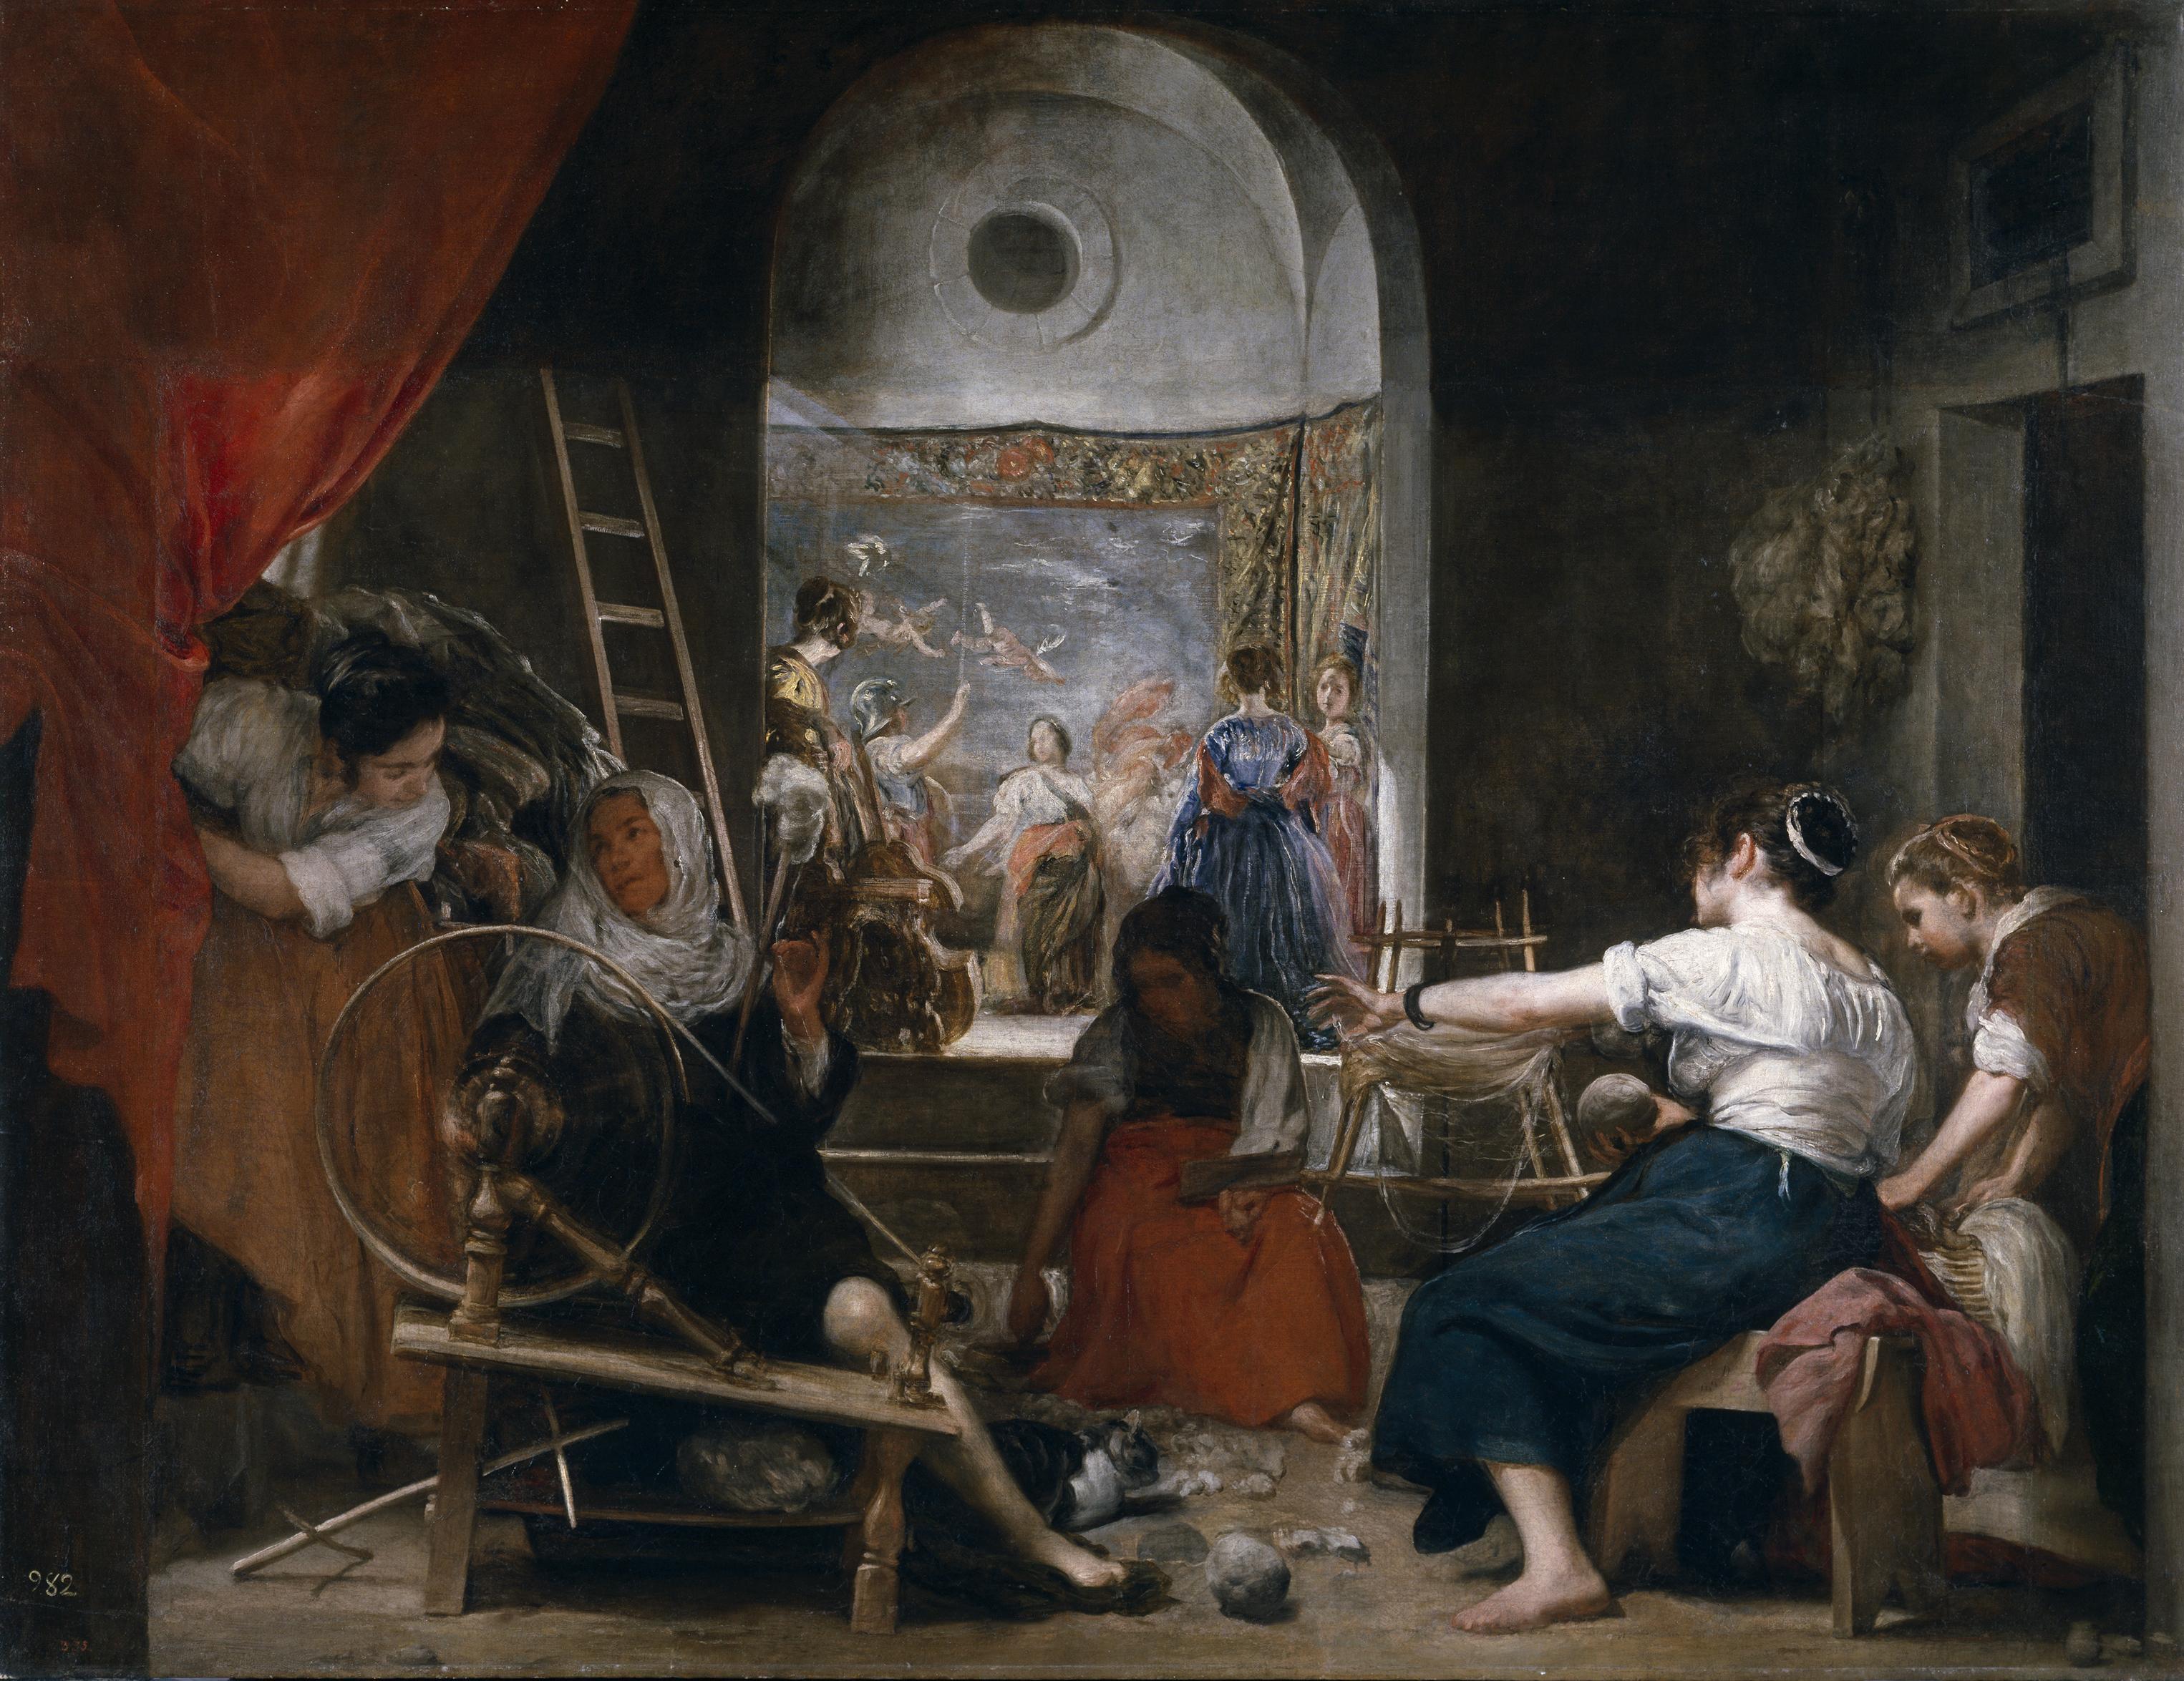 Painting of women using an old loom.